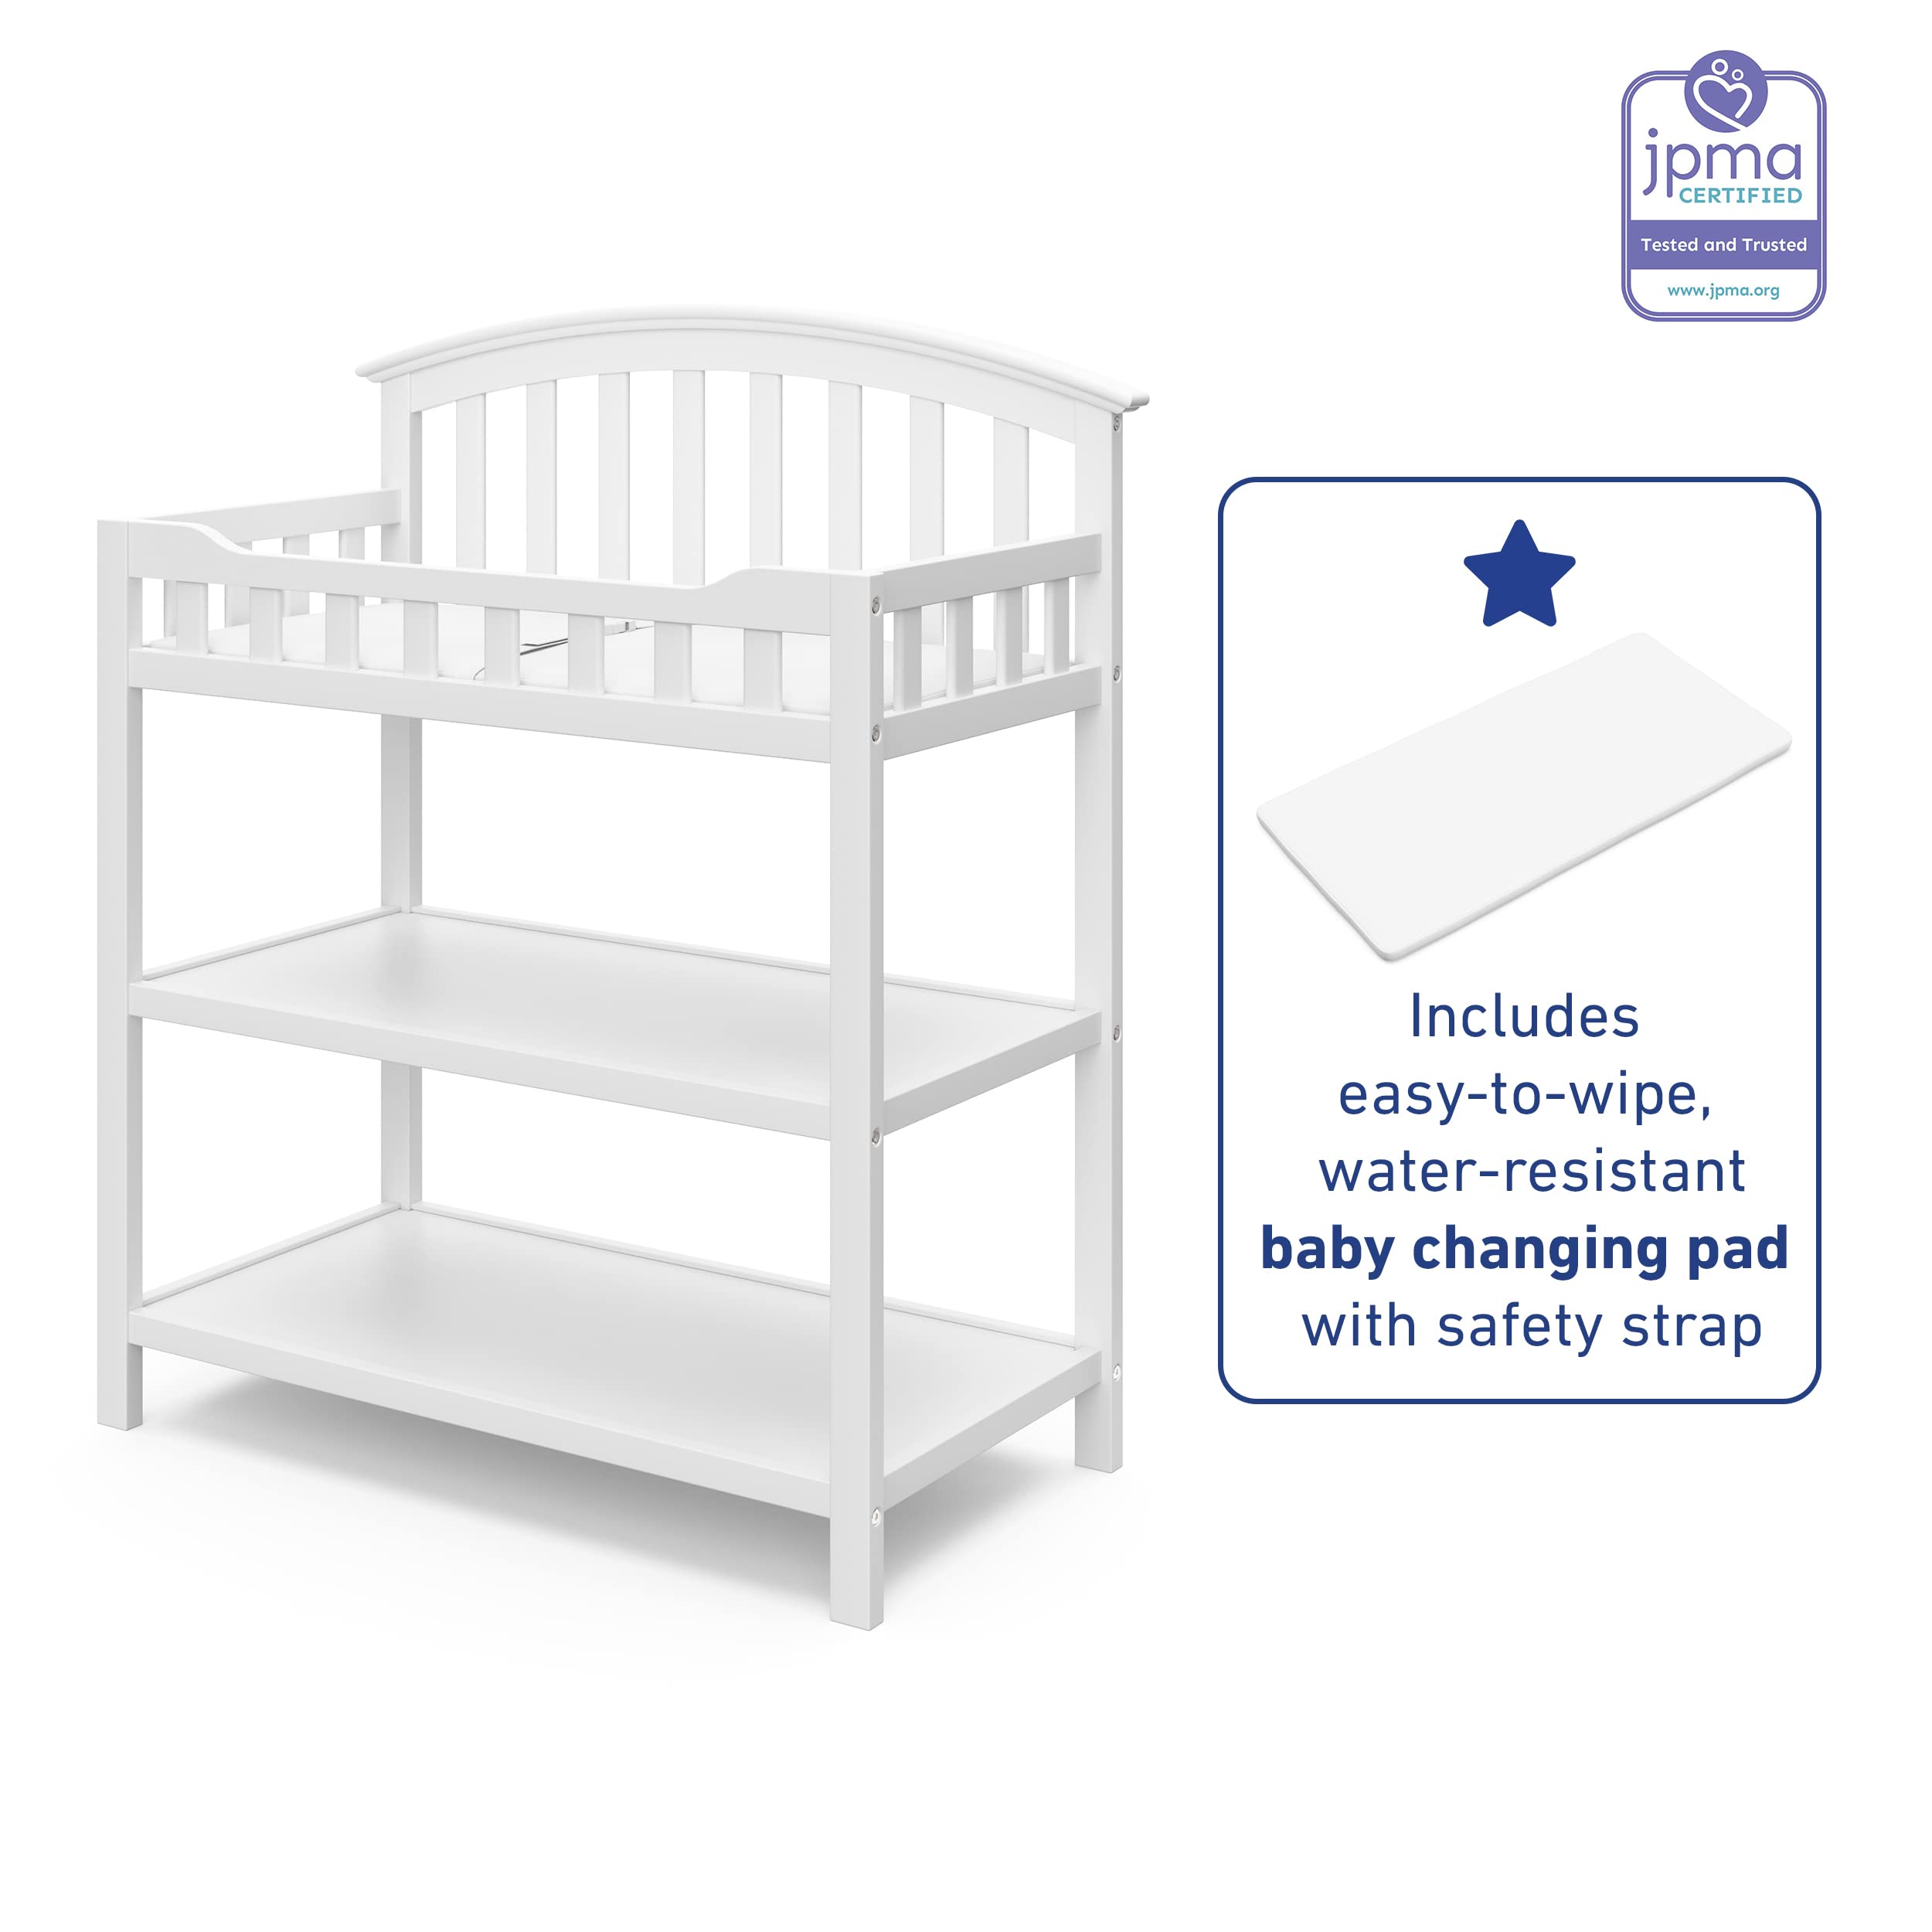 Graco Changing Table with Water-Resistant Change Pad and Safety Strap, White, Multi Storage Nursery Changing Table for Infants or Babies